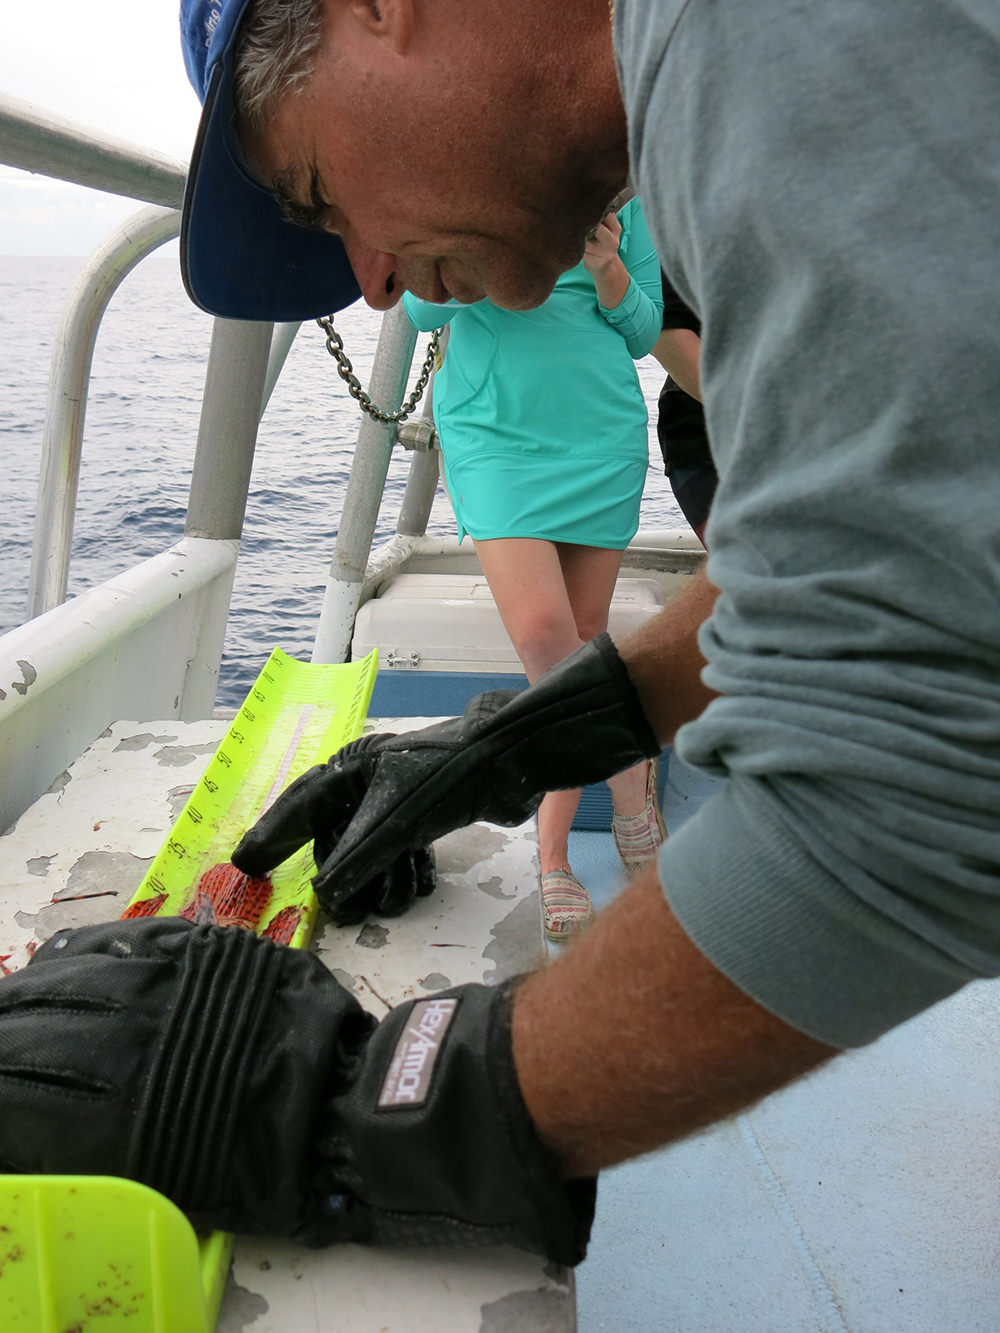 A man wearing puncture proof gloves measuring a lionfish on a fish board